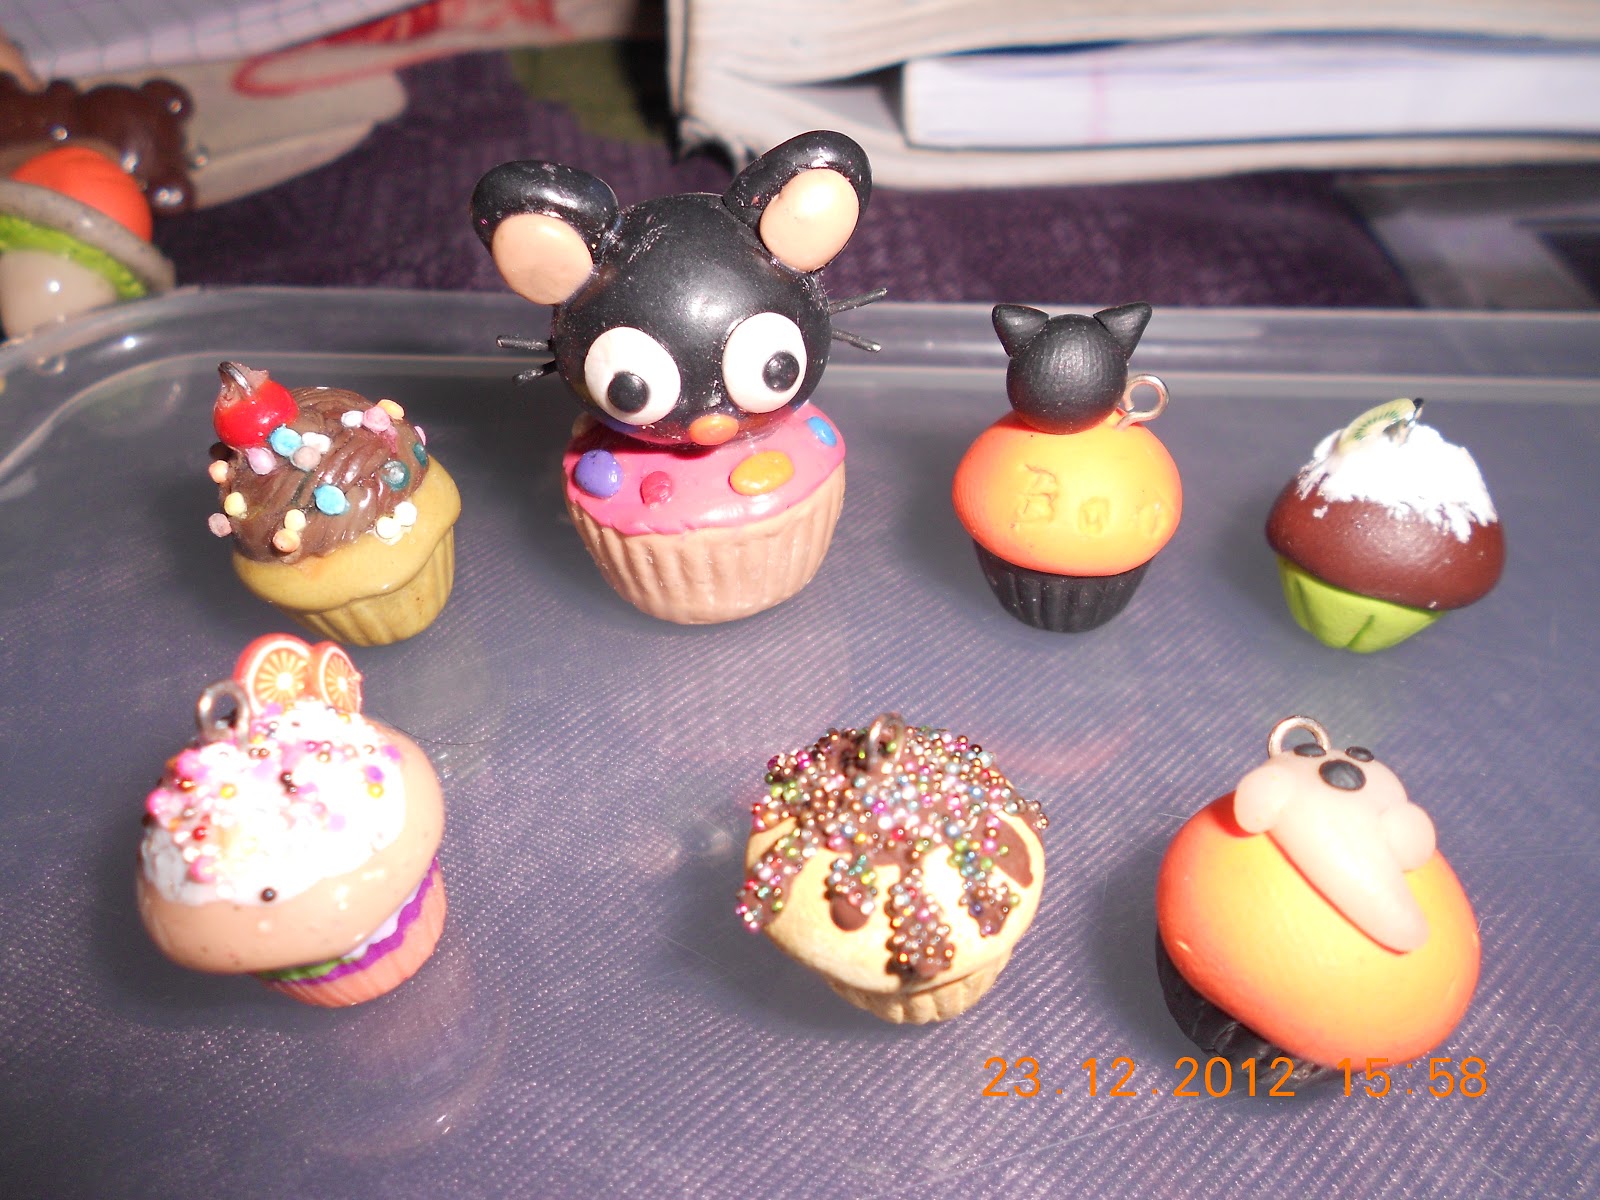 Kawaiimeetsstyle: My Polymer clay / Air dry Clay Creations ( Some Of Them )